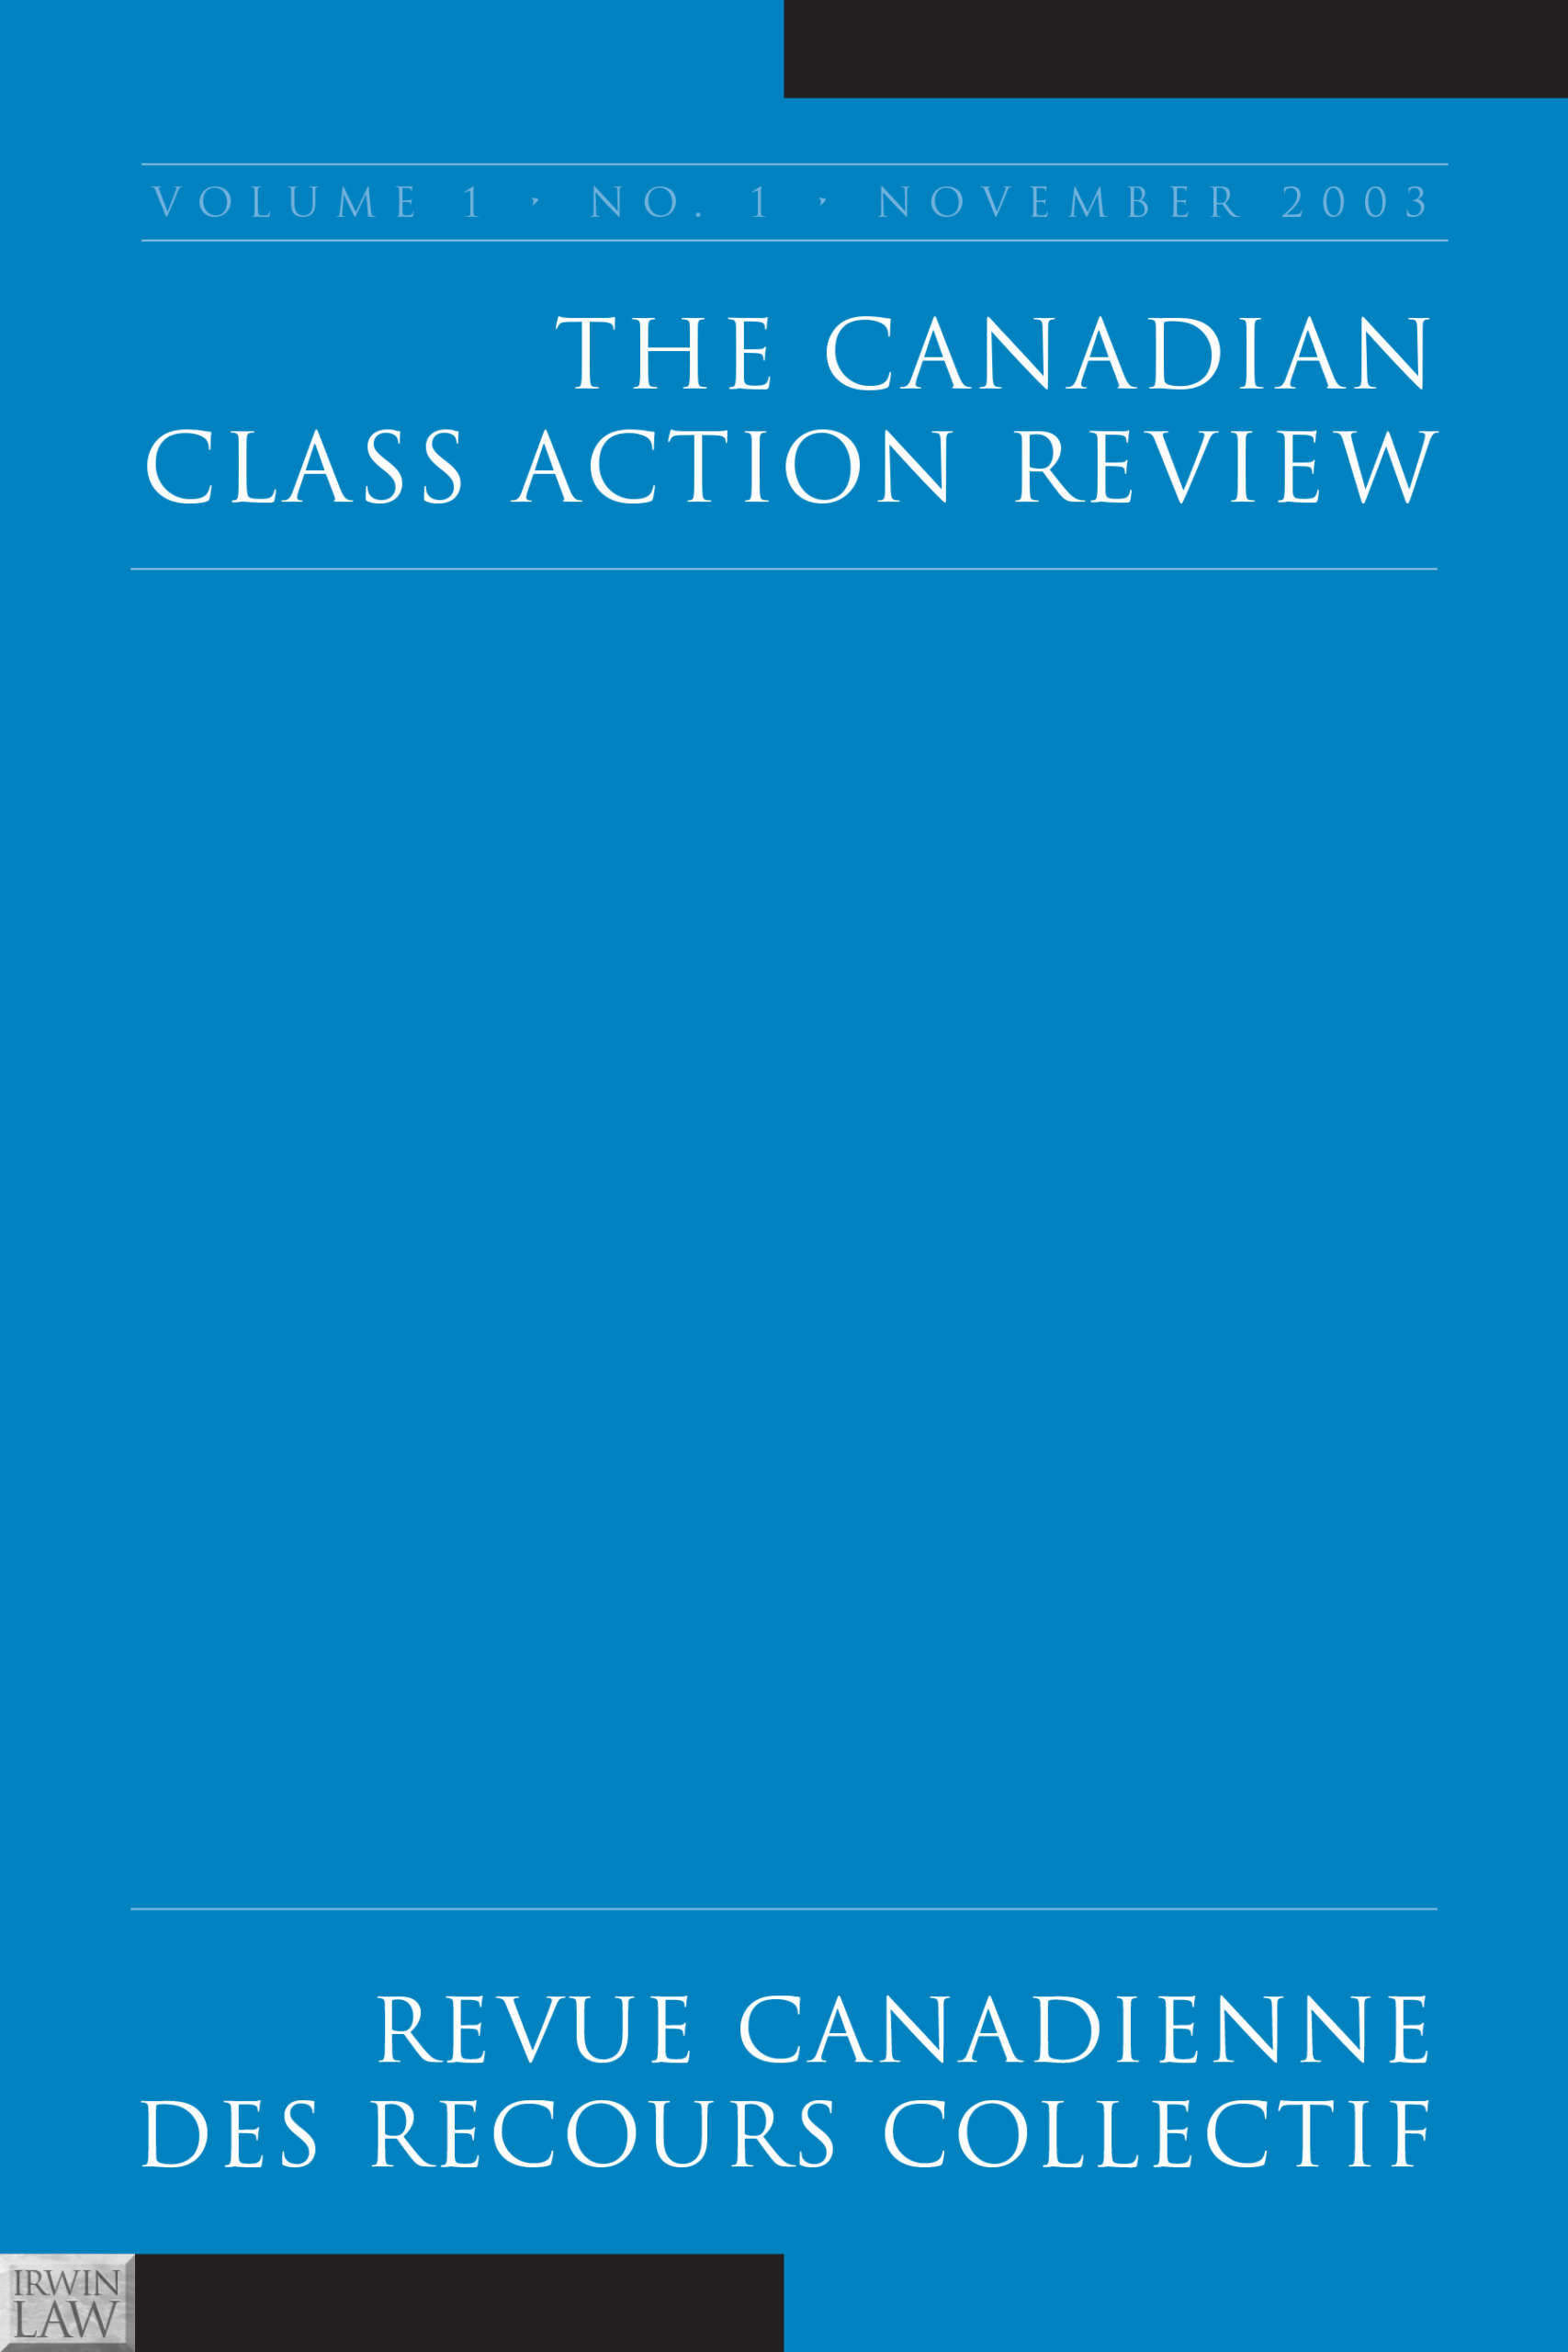 Cover for the Canadian Class Action Review/Revue canadienne des recours collectif. The cover is blue with the words in white in a serif font.